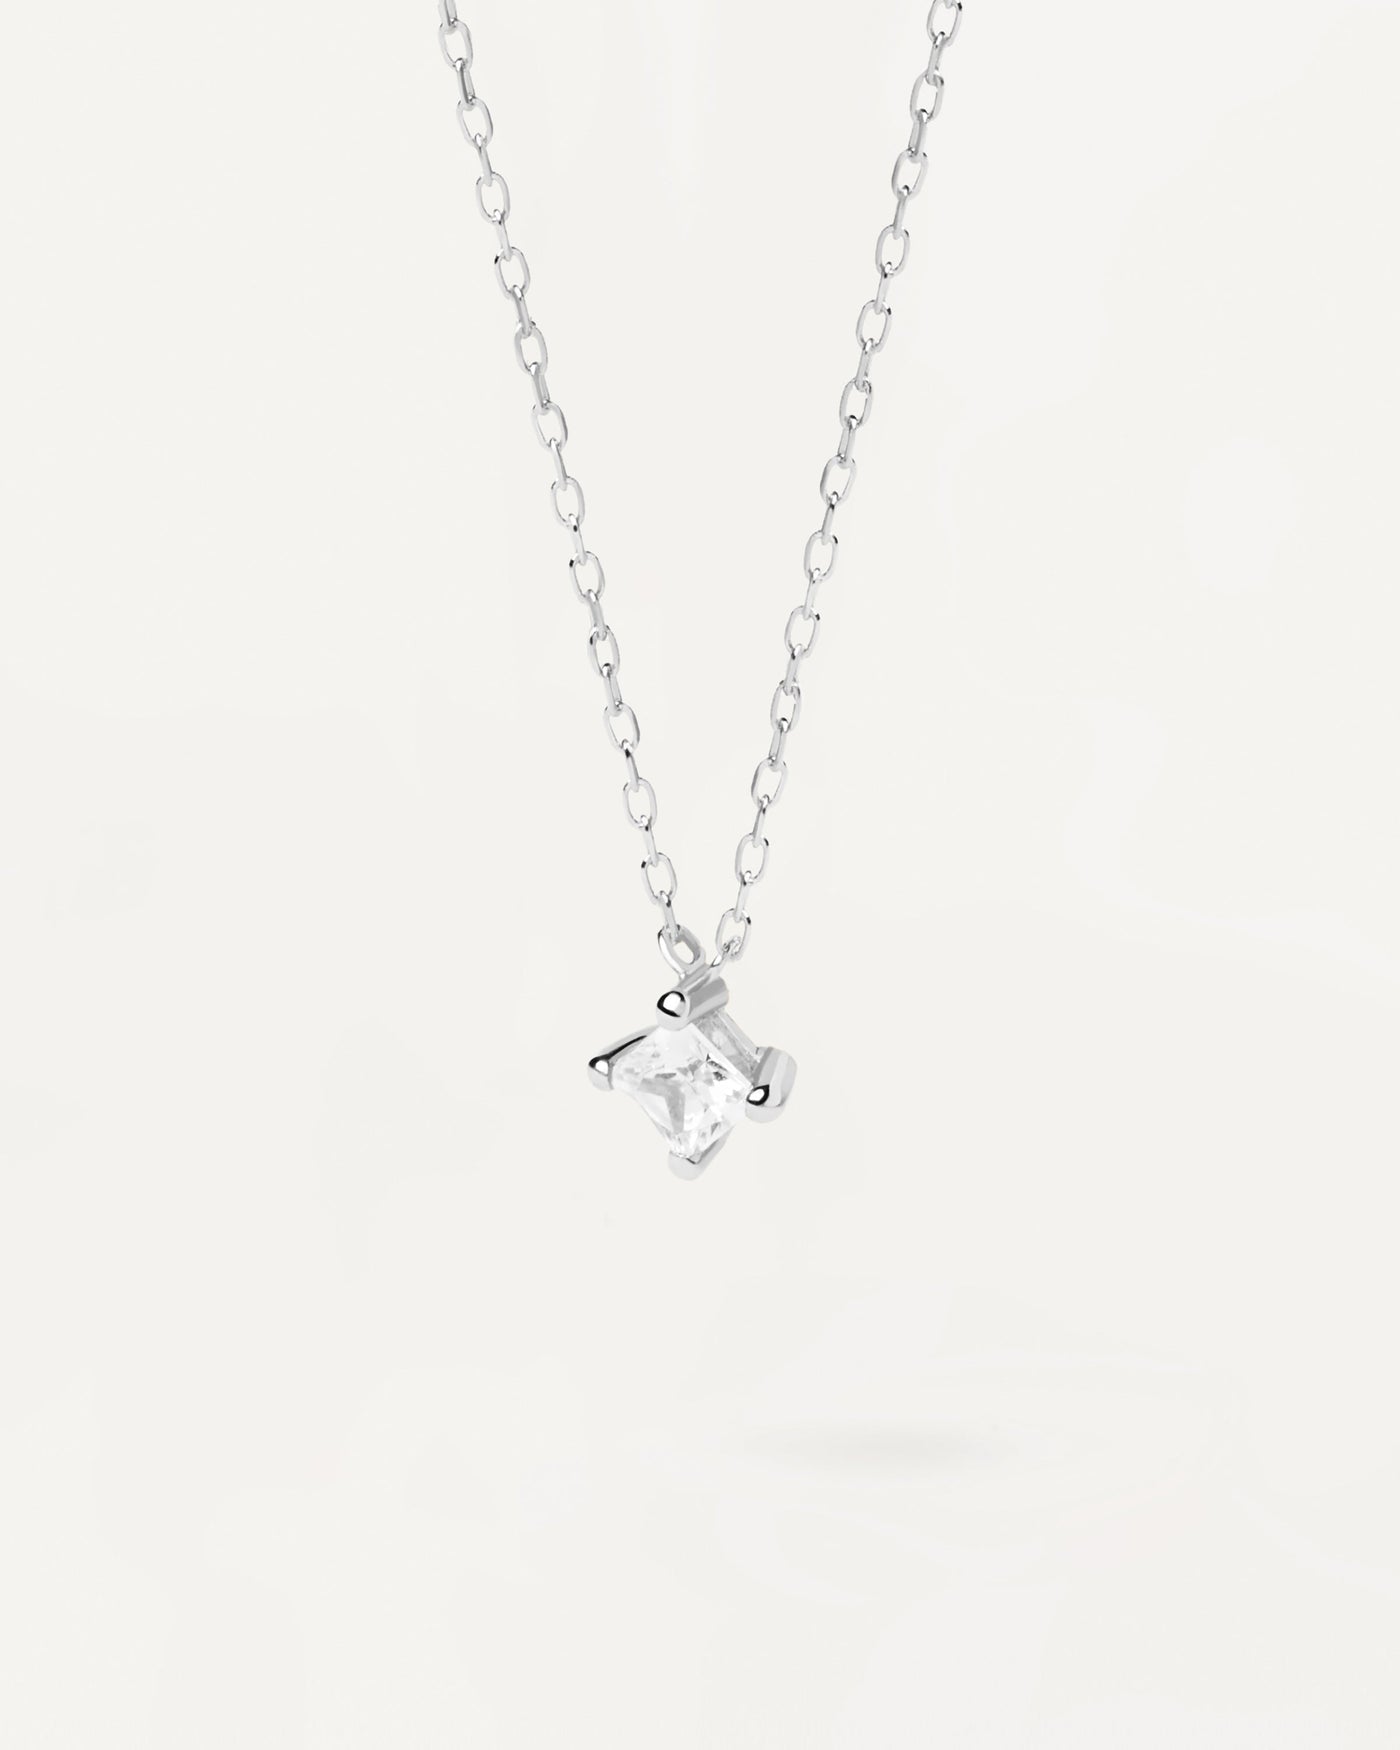 2023 Selection | Diamond And White Gold Solitaire Square Necklace. 18K white gold necklace with squared princess diamond of 0.33 carat. Get the latest arrival from PDPAOLA. Place your order safely and get this Best Seller. Free Shipping.